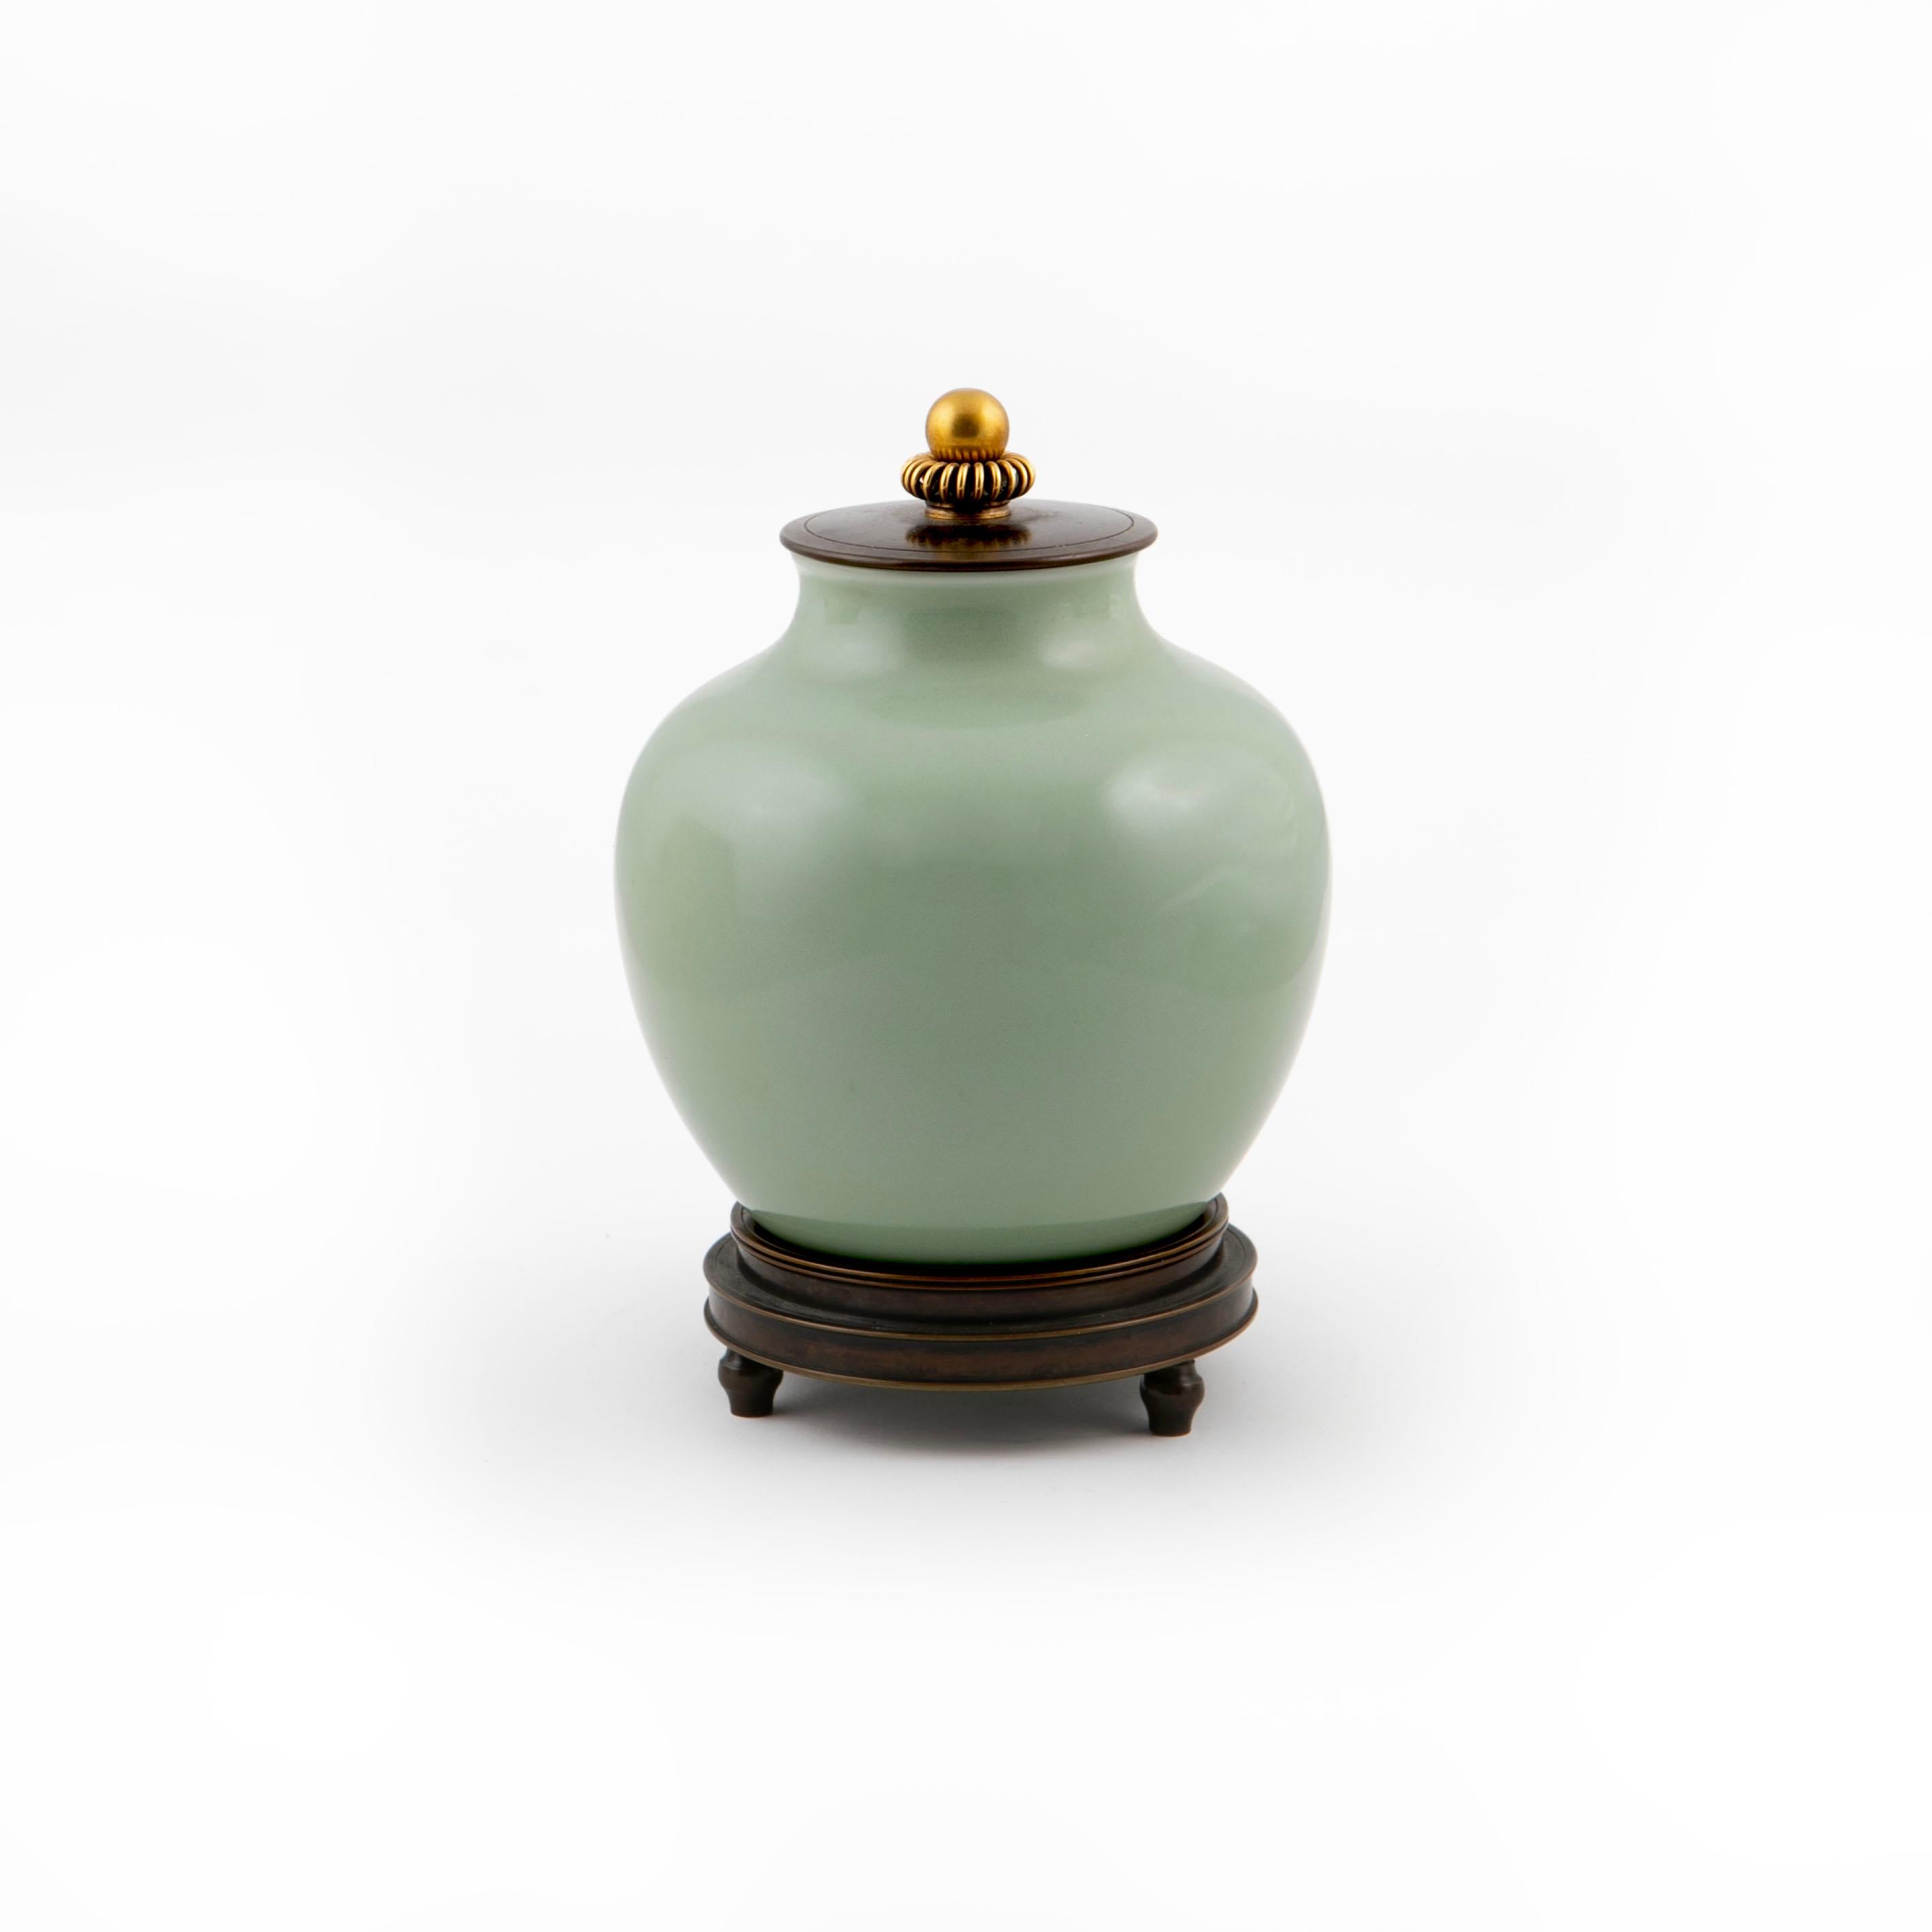 Knud Andersen (Danish, 1892-1966) for Royal Copenhagen.

Lidded stoneware vase decorated with green celadon glaze, fitted with patinated bronze lid and gilded knob. Resting on patinated bronze stand.

Produced and stamped 1/3336 in Royal Copenhagen.